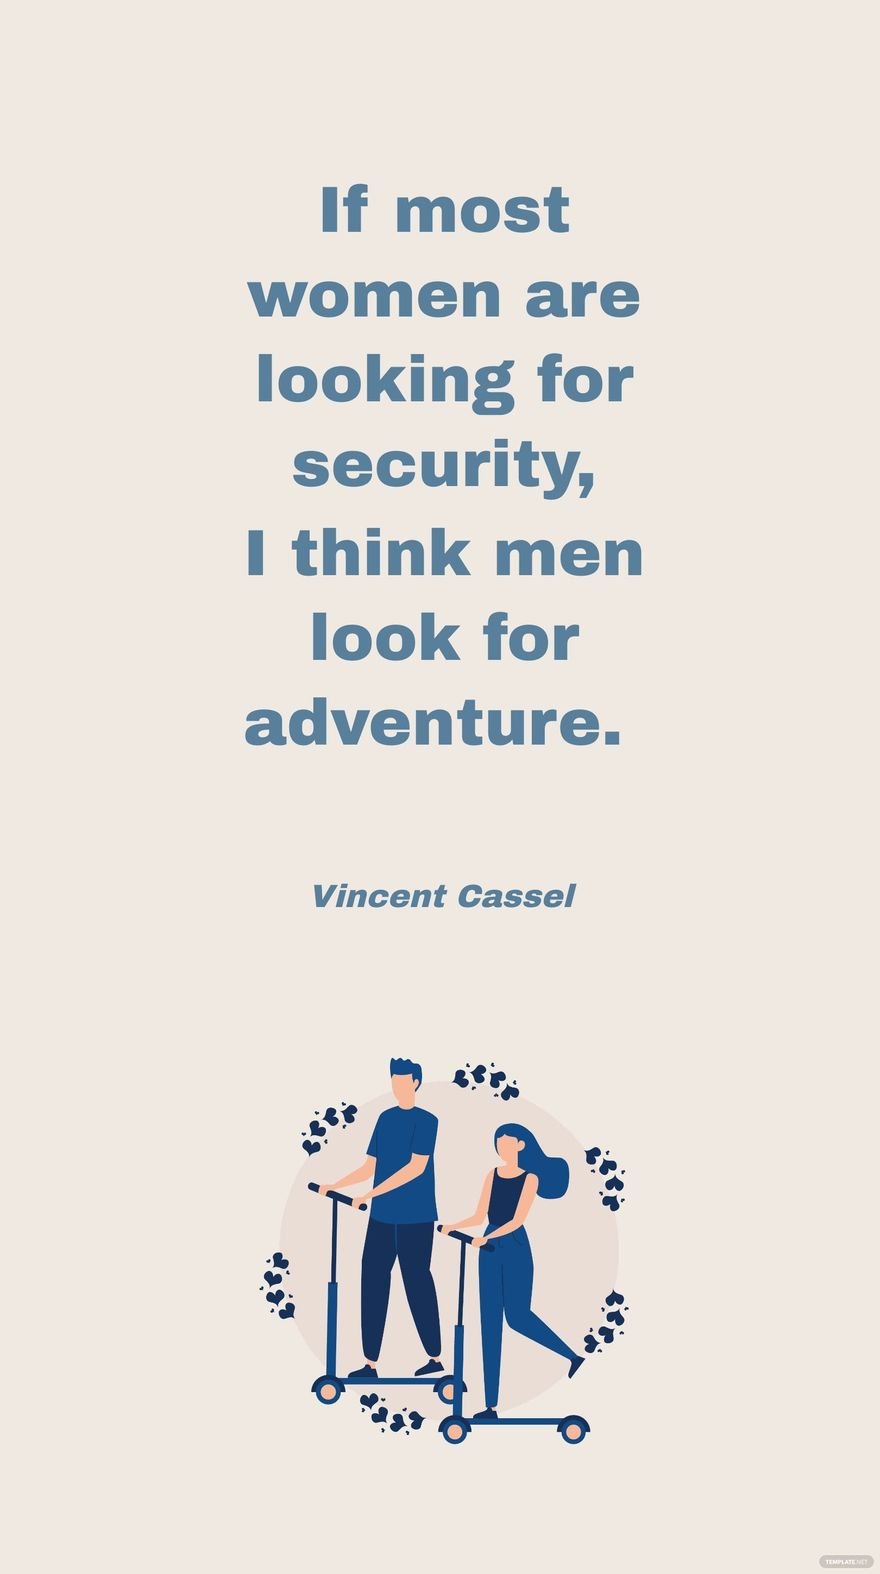 Free Vincent Cassel - If most women are looking for security, I think men look for adventure.